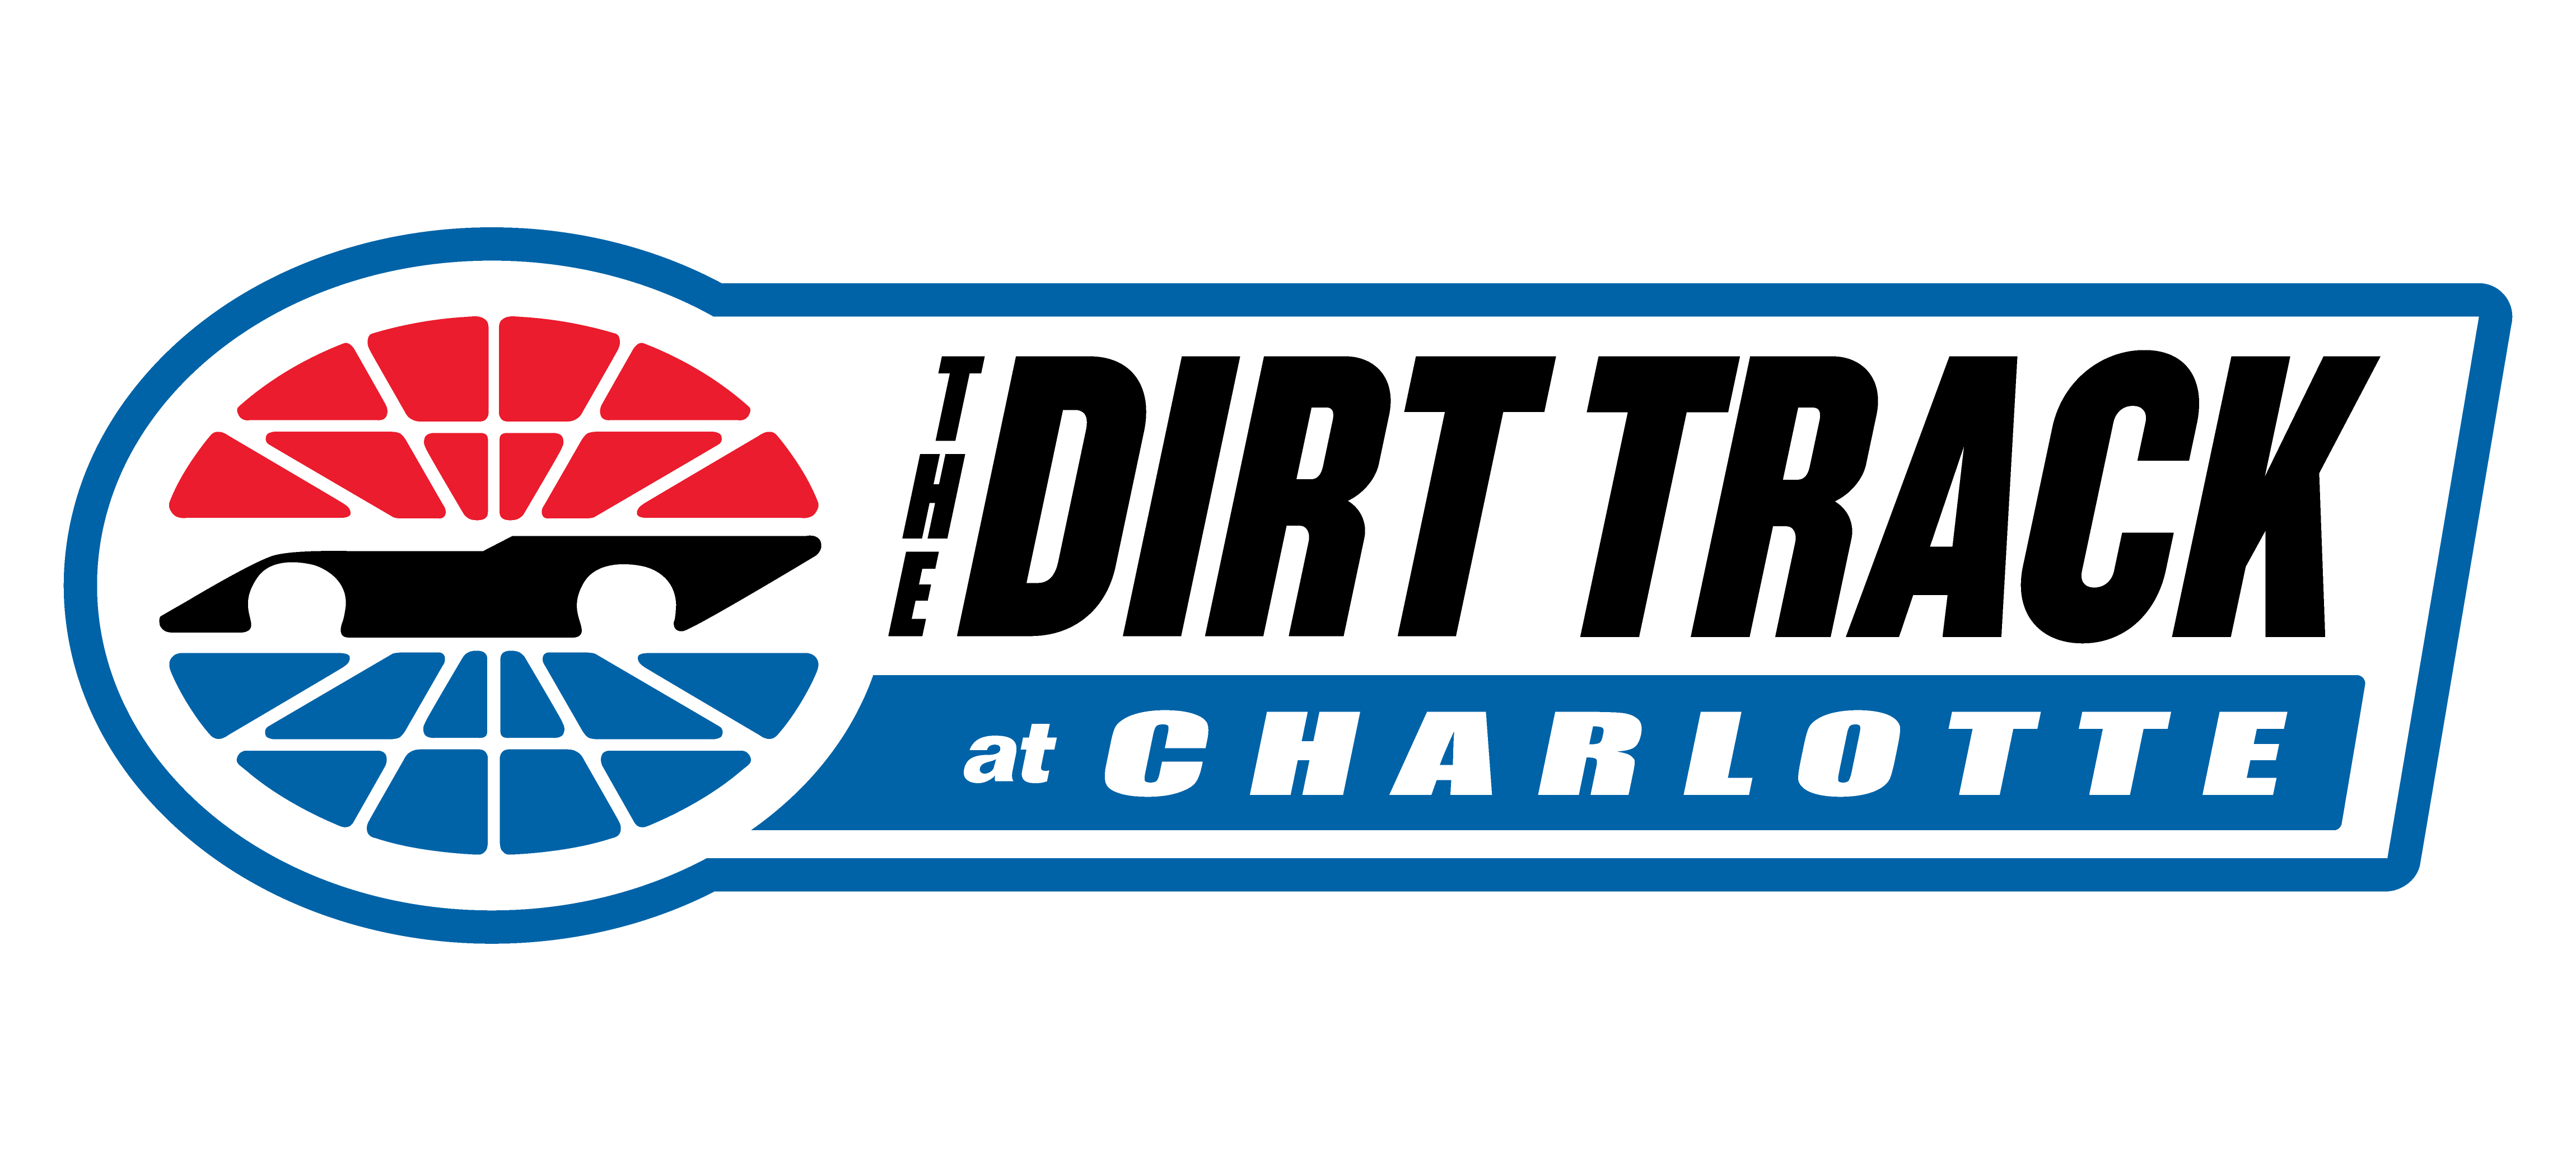 2018_CHARLOTTE_DIRT_TRACK.png